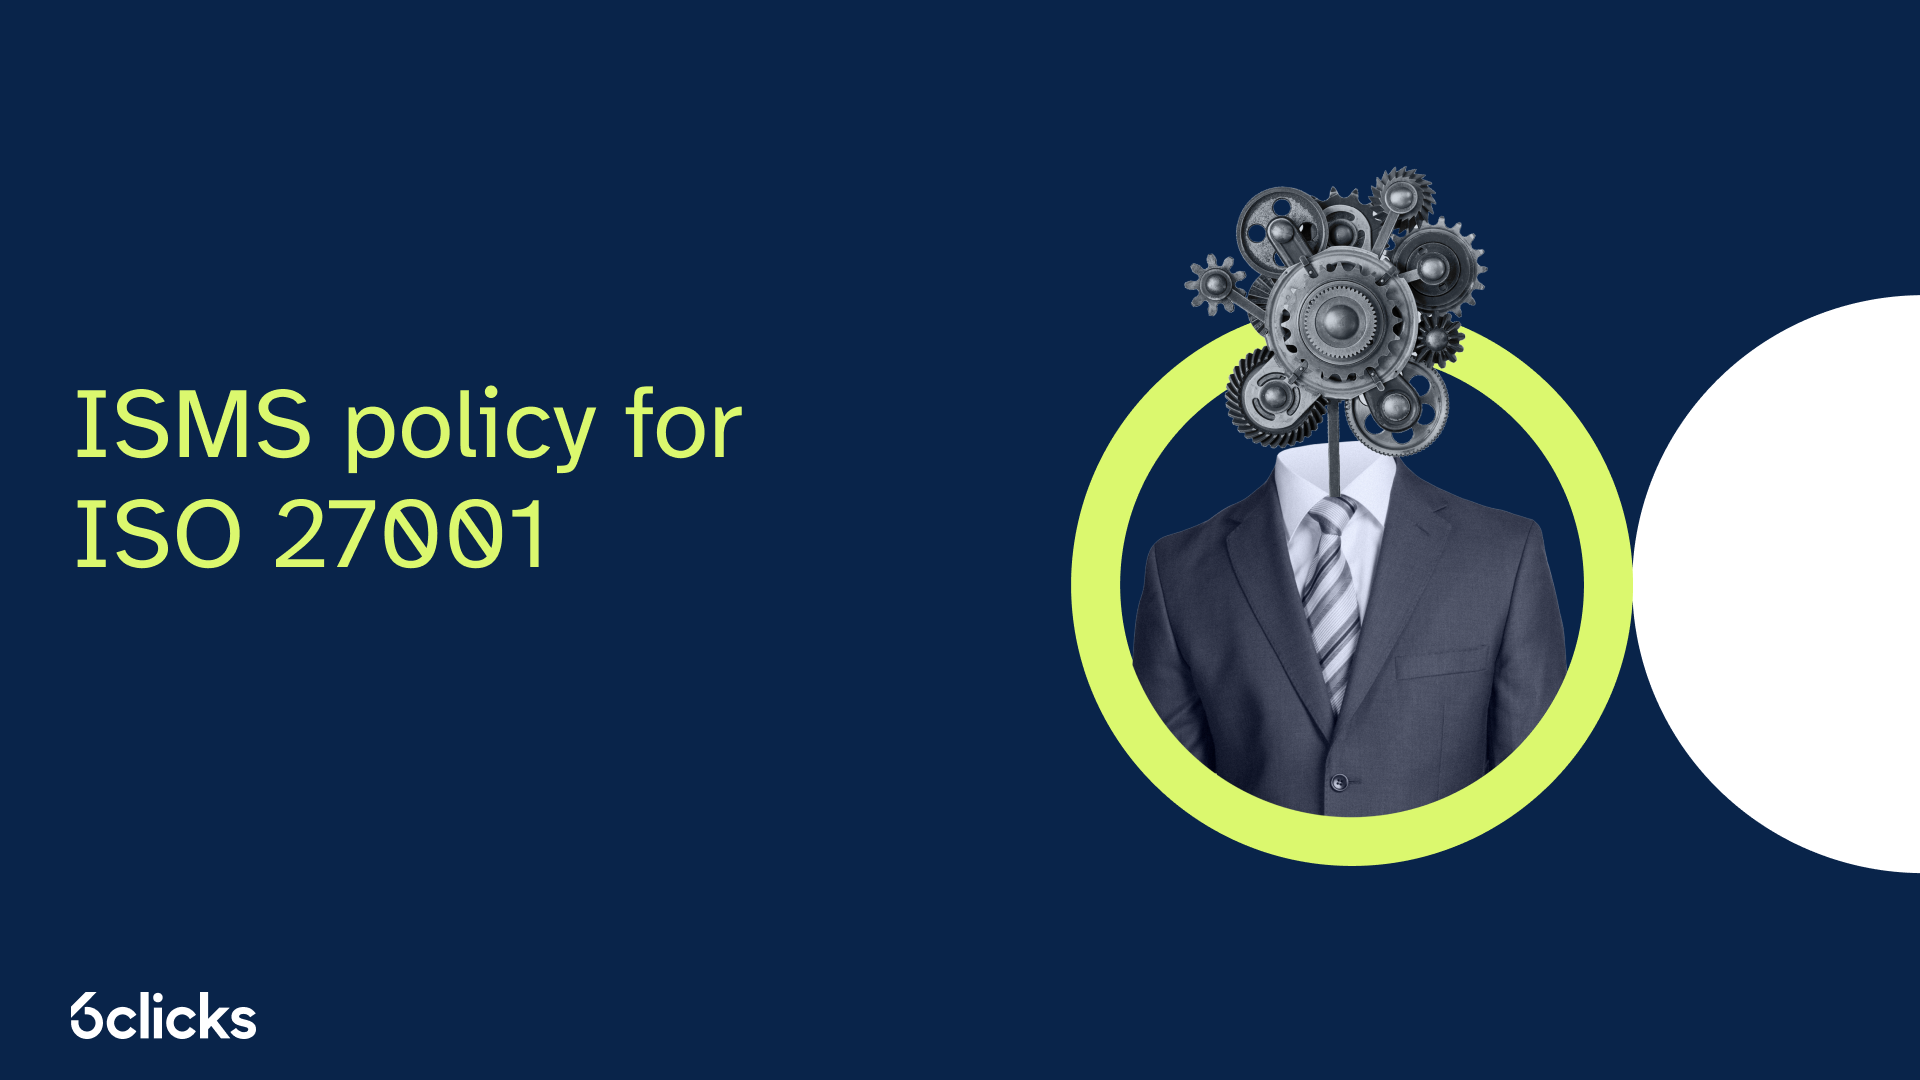 ISMS policy for ISO 27001